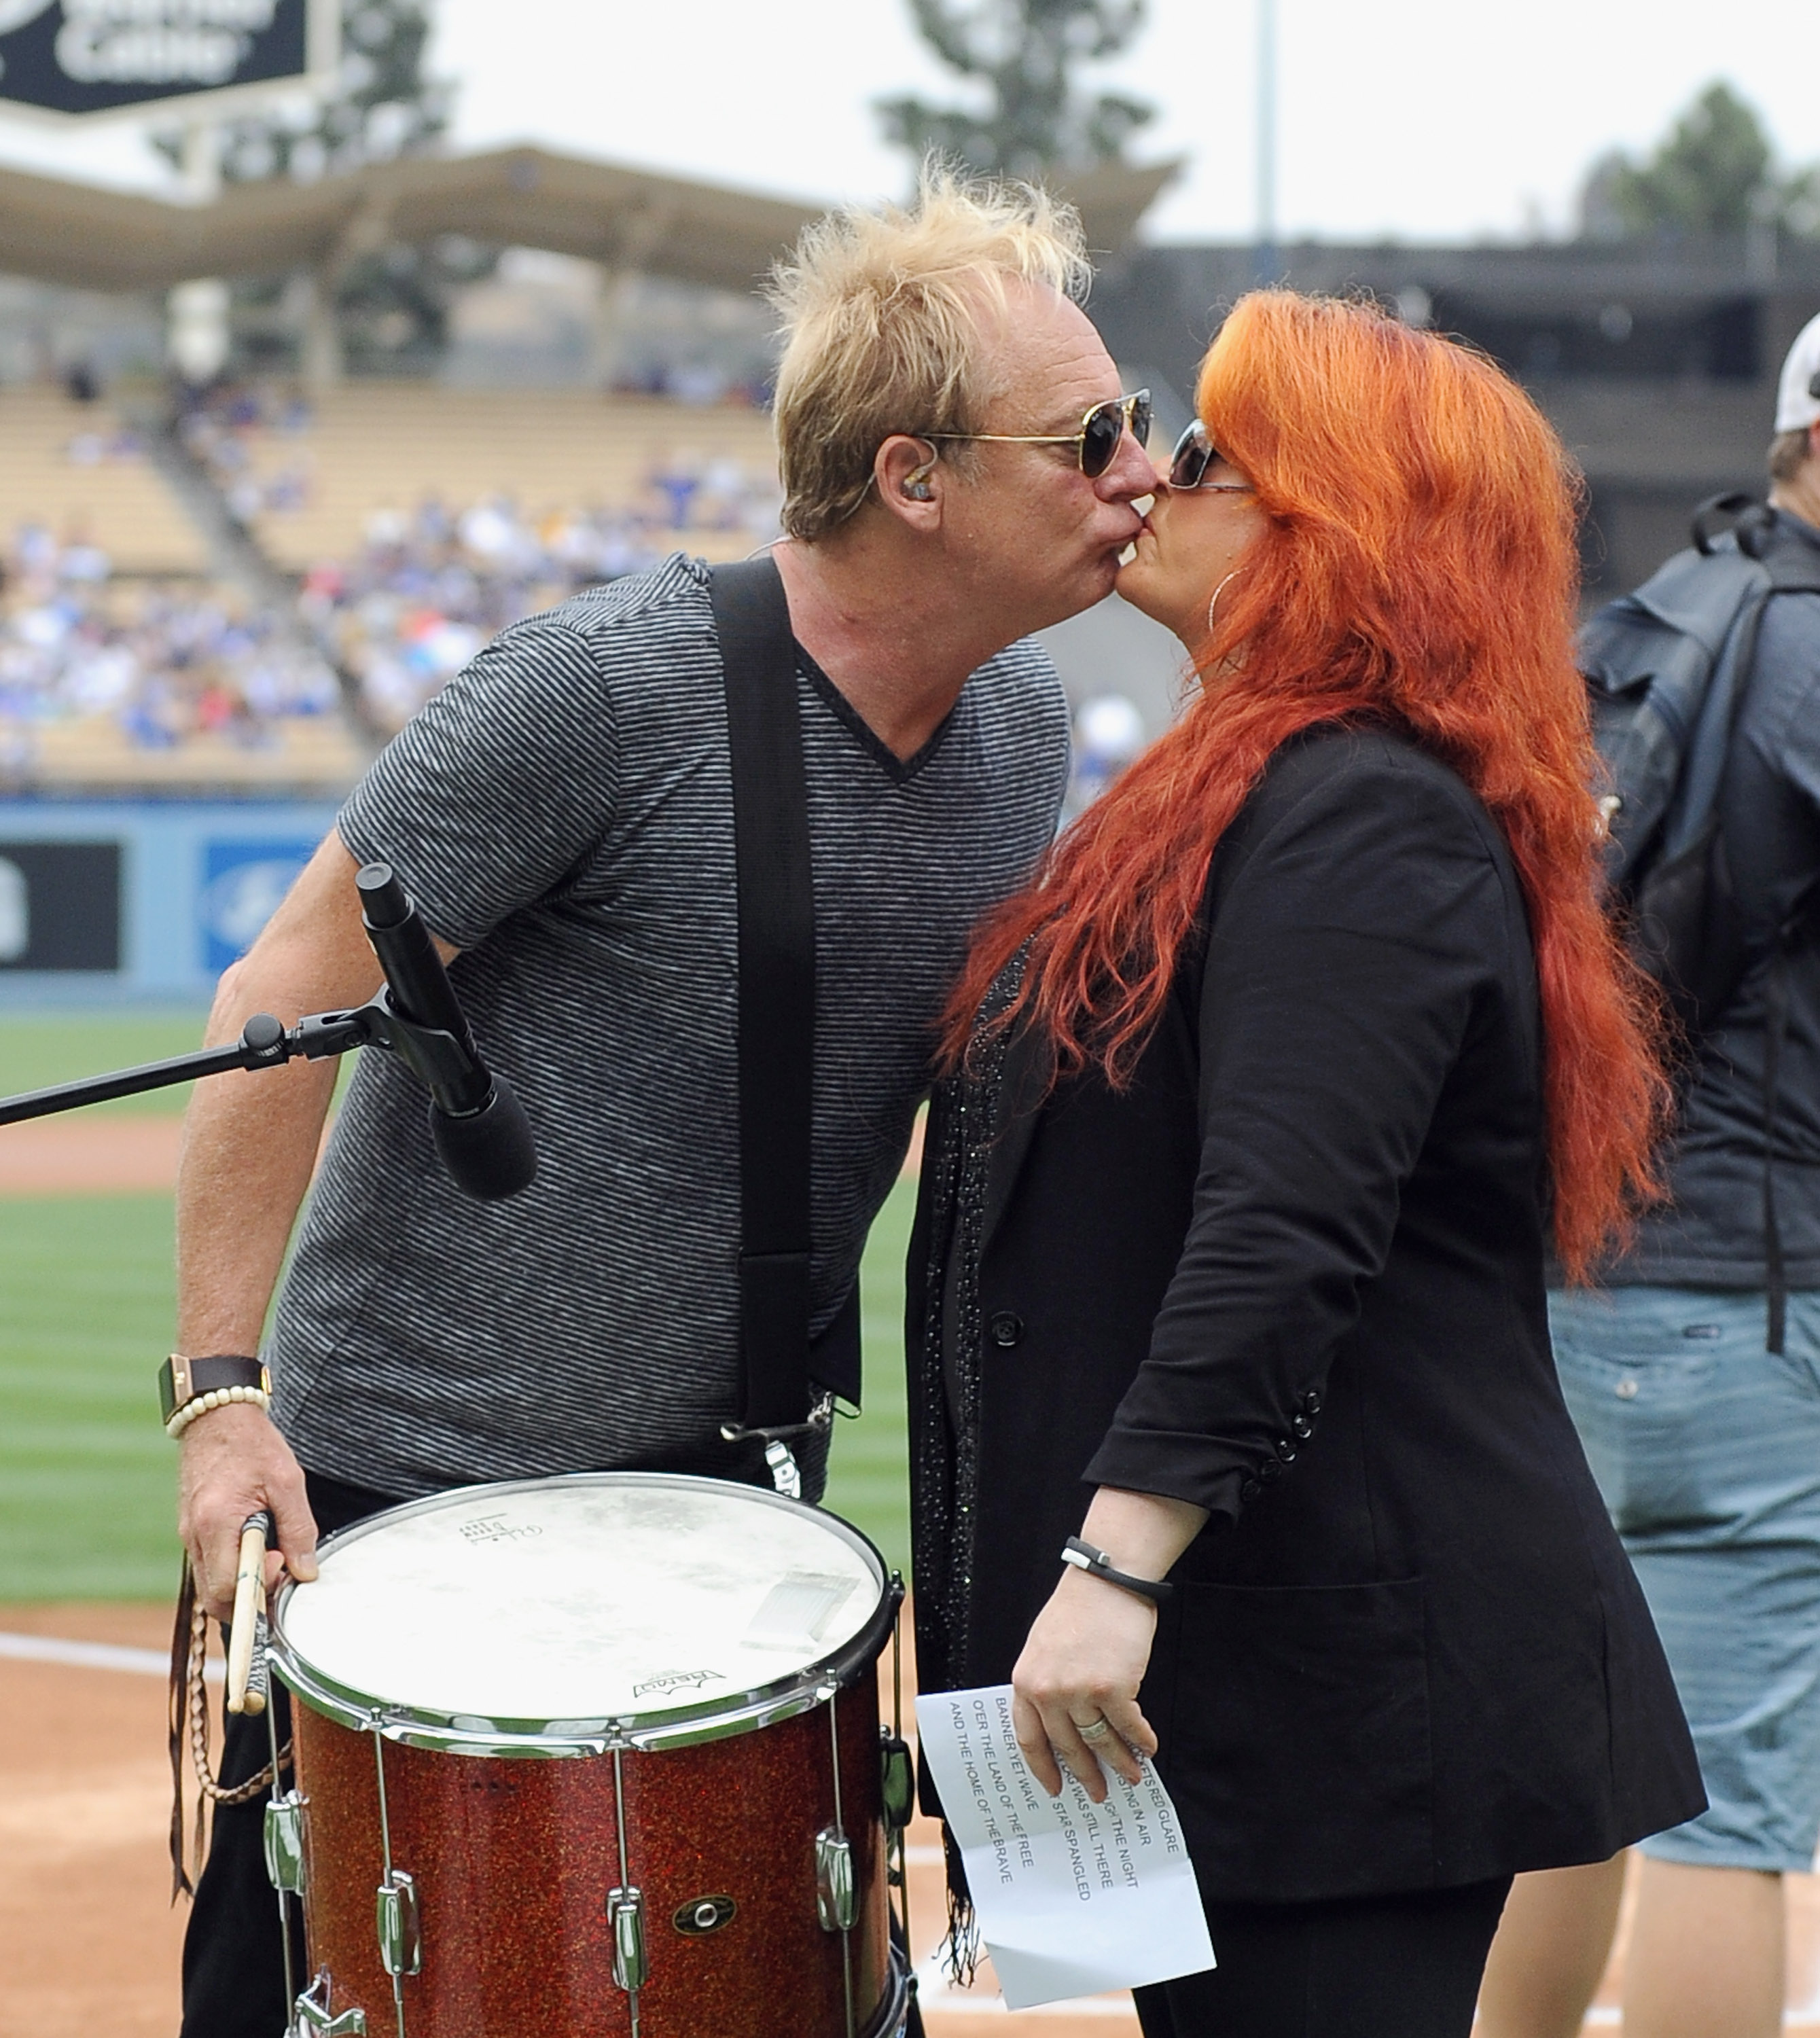 Cactus Moser and Wynonna Judd at an LA Dodgers Game in Los Angeles, 2014 | Source: Getty Images